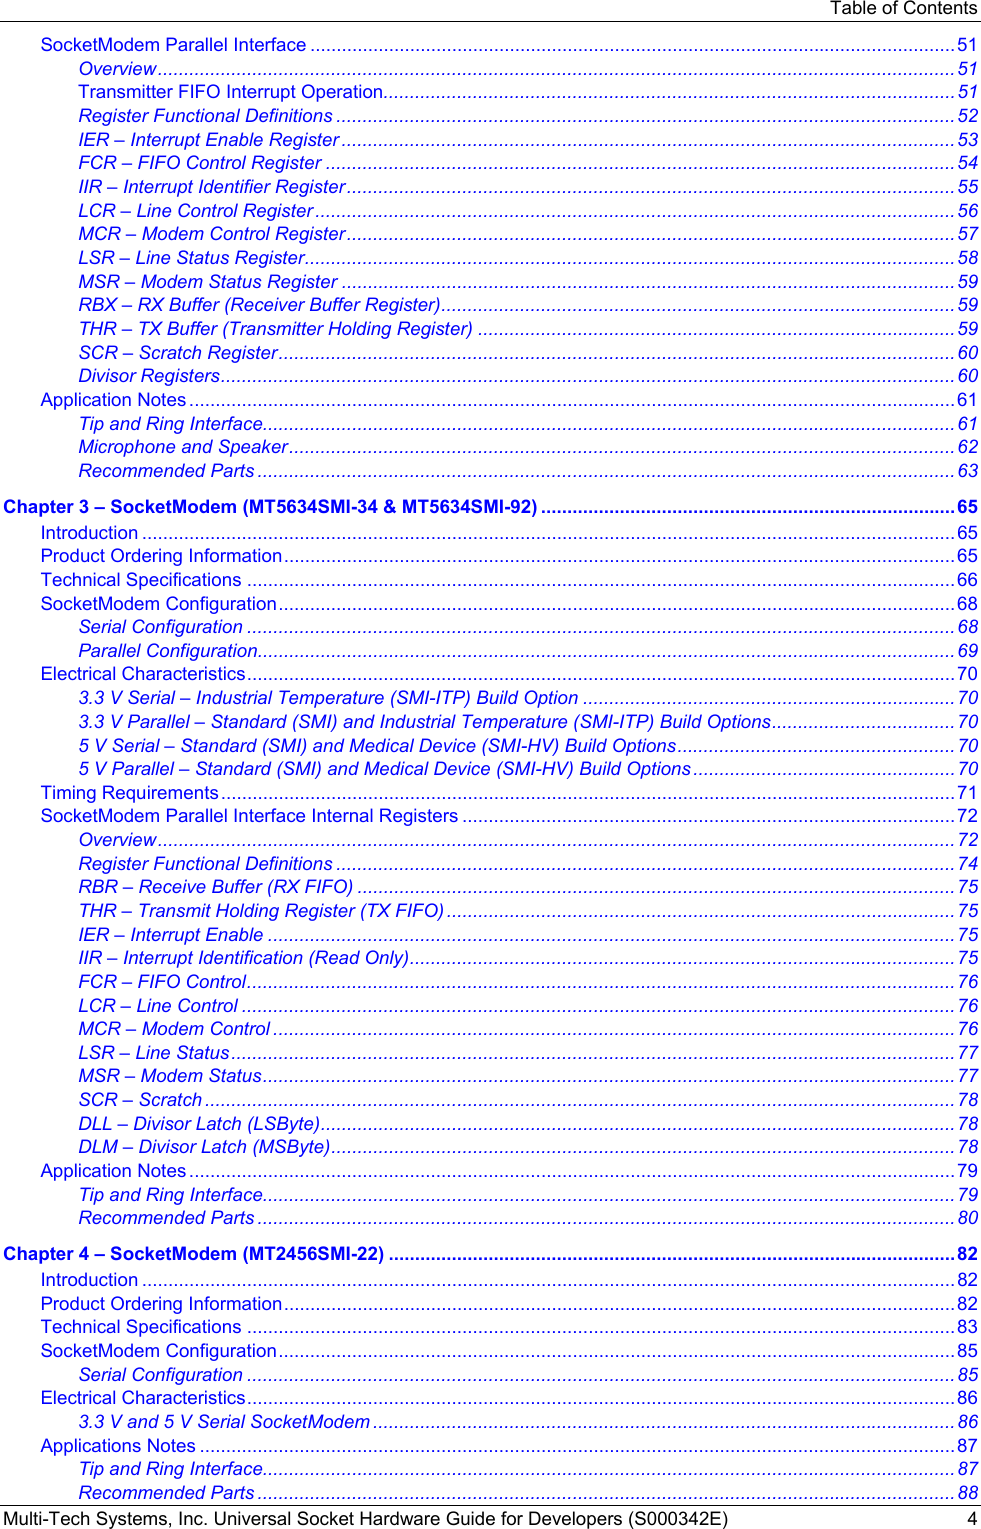 Table of Contents Multi-Tech Systems, Inc. Universal Socket Hardware Guide for Developers (S000342E)  4 SocketModem Parallel Interface ...........................................................................................................................51 Overview........................................................................................................................................................51 Transmitter FIFO Interrupt Operation.............................................................................................................51 Register Functional Definitions ......................................................................................................................52 IER – Interrupt Enable Register .....................................................................................................................53 FCR – FIFO Control Register ........................................................................................................................54 IIR – Interrupt Identifier Register....................................................................................................................55 LCR – Line Control Register ..........................................................................................................................56 MCR – Modem Control Register....................................................................................................................57 LSR – Line Status Register............................................................................................................................58 MSR – Modem Status Register .....................................................................................................................59 RBX – RX Buffer (Receiver Buffer Register)..................................................................................................59 THR – TX Buffer (Transmitter Holding Register) ...........................................................................................59 SCR – Scratch Register.................................................................................................................................60 Divisor Registers............................................................................................................................................60 Application Notes ..................................................................................................................................................61 Tip and Ring Interface....................................................................................................................................61 Microphone and Speaker...............................................................................................................................62 Recommended Parts .....................................................................................................................................63 Chapter 3 – SocketModem (MT5634SMI-34 &amp; MT5634SMI-92) ...............................................................................65 Introduction ...........................................................................................................................................................65 Product Ordering Information................................................................................................................................65 Technical Specifications .......................................................................................................................................66 SocketModem Configuration.................................................................................................................................68 Serial Configuration .......................................................................................................................................68 Parallel Configuration.....................................................................................................................................69 Electrical Characteristics.......................................................................................................................................70 3.3 V Serial – Industrial Temperature (SMI-ITP) Build Option .......................................................................70 3.3 V Parallel – Standard (SMI) and Industrial Temperature (SMI-ITP) Build Options...................................70 5 V Serial – Standard (SMI) and Medical Device (SMI-HV) Build Options.....................................................70 5 V Parallel – Standard (SMI) and Medical Device (SMI-HV) Build Options ..................................................70 Timing Requirements............................................................................................................................................71 SocketModem Parallel Interface Internal Registers ..............................................................................................72 Overview........................................................................................................................................................72 Register Functional Definitions ......................................................................................................................74 RBR – Receive Buffer (RX FIFO) ..................................................................................................................75 THR – Transmit Holding Register (TX FIFO) .................................................................................................75 IER – Interrupt Enable ...................................................................................................................................75 IIR – Interrupt Identification (Read Only)........................................................................................................75 FCR – FIFO Control.......................................................................................................................................76 LCR – Line Control ........................................................................................................................................76 MCR – Modem Control ..................................................................................................................................76 LSR – Line Status..........................................................................................................................................77 MSR – Modem Status....................................................................................................................................77 SCR – Scratch ...............................................................................................................................................78 DLL – Divisor Latch (LSByte).........................................................................................................................78 DLM – Divisor Latch (MSByte).......................................................................................................................78 Application Notes ..................................................................................................................................................79 Tip and Ring Interface....................................................................................................................................79 Recommended Parts .....................................................................................................................................80 Chapter 4 – SocketModem (MT2456SMI-22) ............................................................................................................82 Introduction ...........................................................................................................................................................82 Product Ordering Information................................................................................................................................82 Technical Specifications .......................................................................................................................................83 SocketModem Configuration.................................................................................................................................85 Serial Configuration .......................................................................................................................................85 Electrical Characteristics.......................................................................................................................................86 3.3 V and 5 V Serial SocketModem ...............................................................................................................86 Applications Notes ................................................................................................................................................87 Tip and Ring Interface....................................................................................................................................87 Recommended Parts .....................................................................................................................................88 